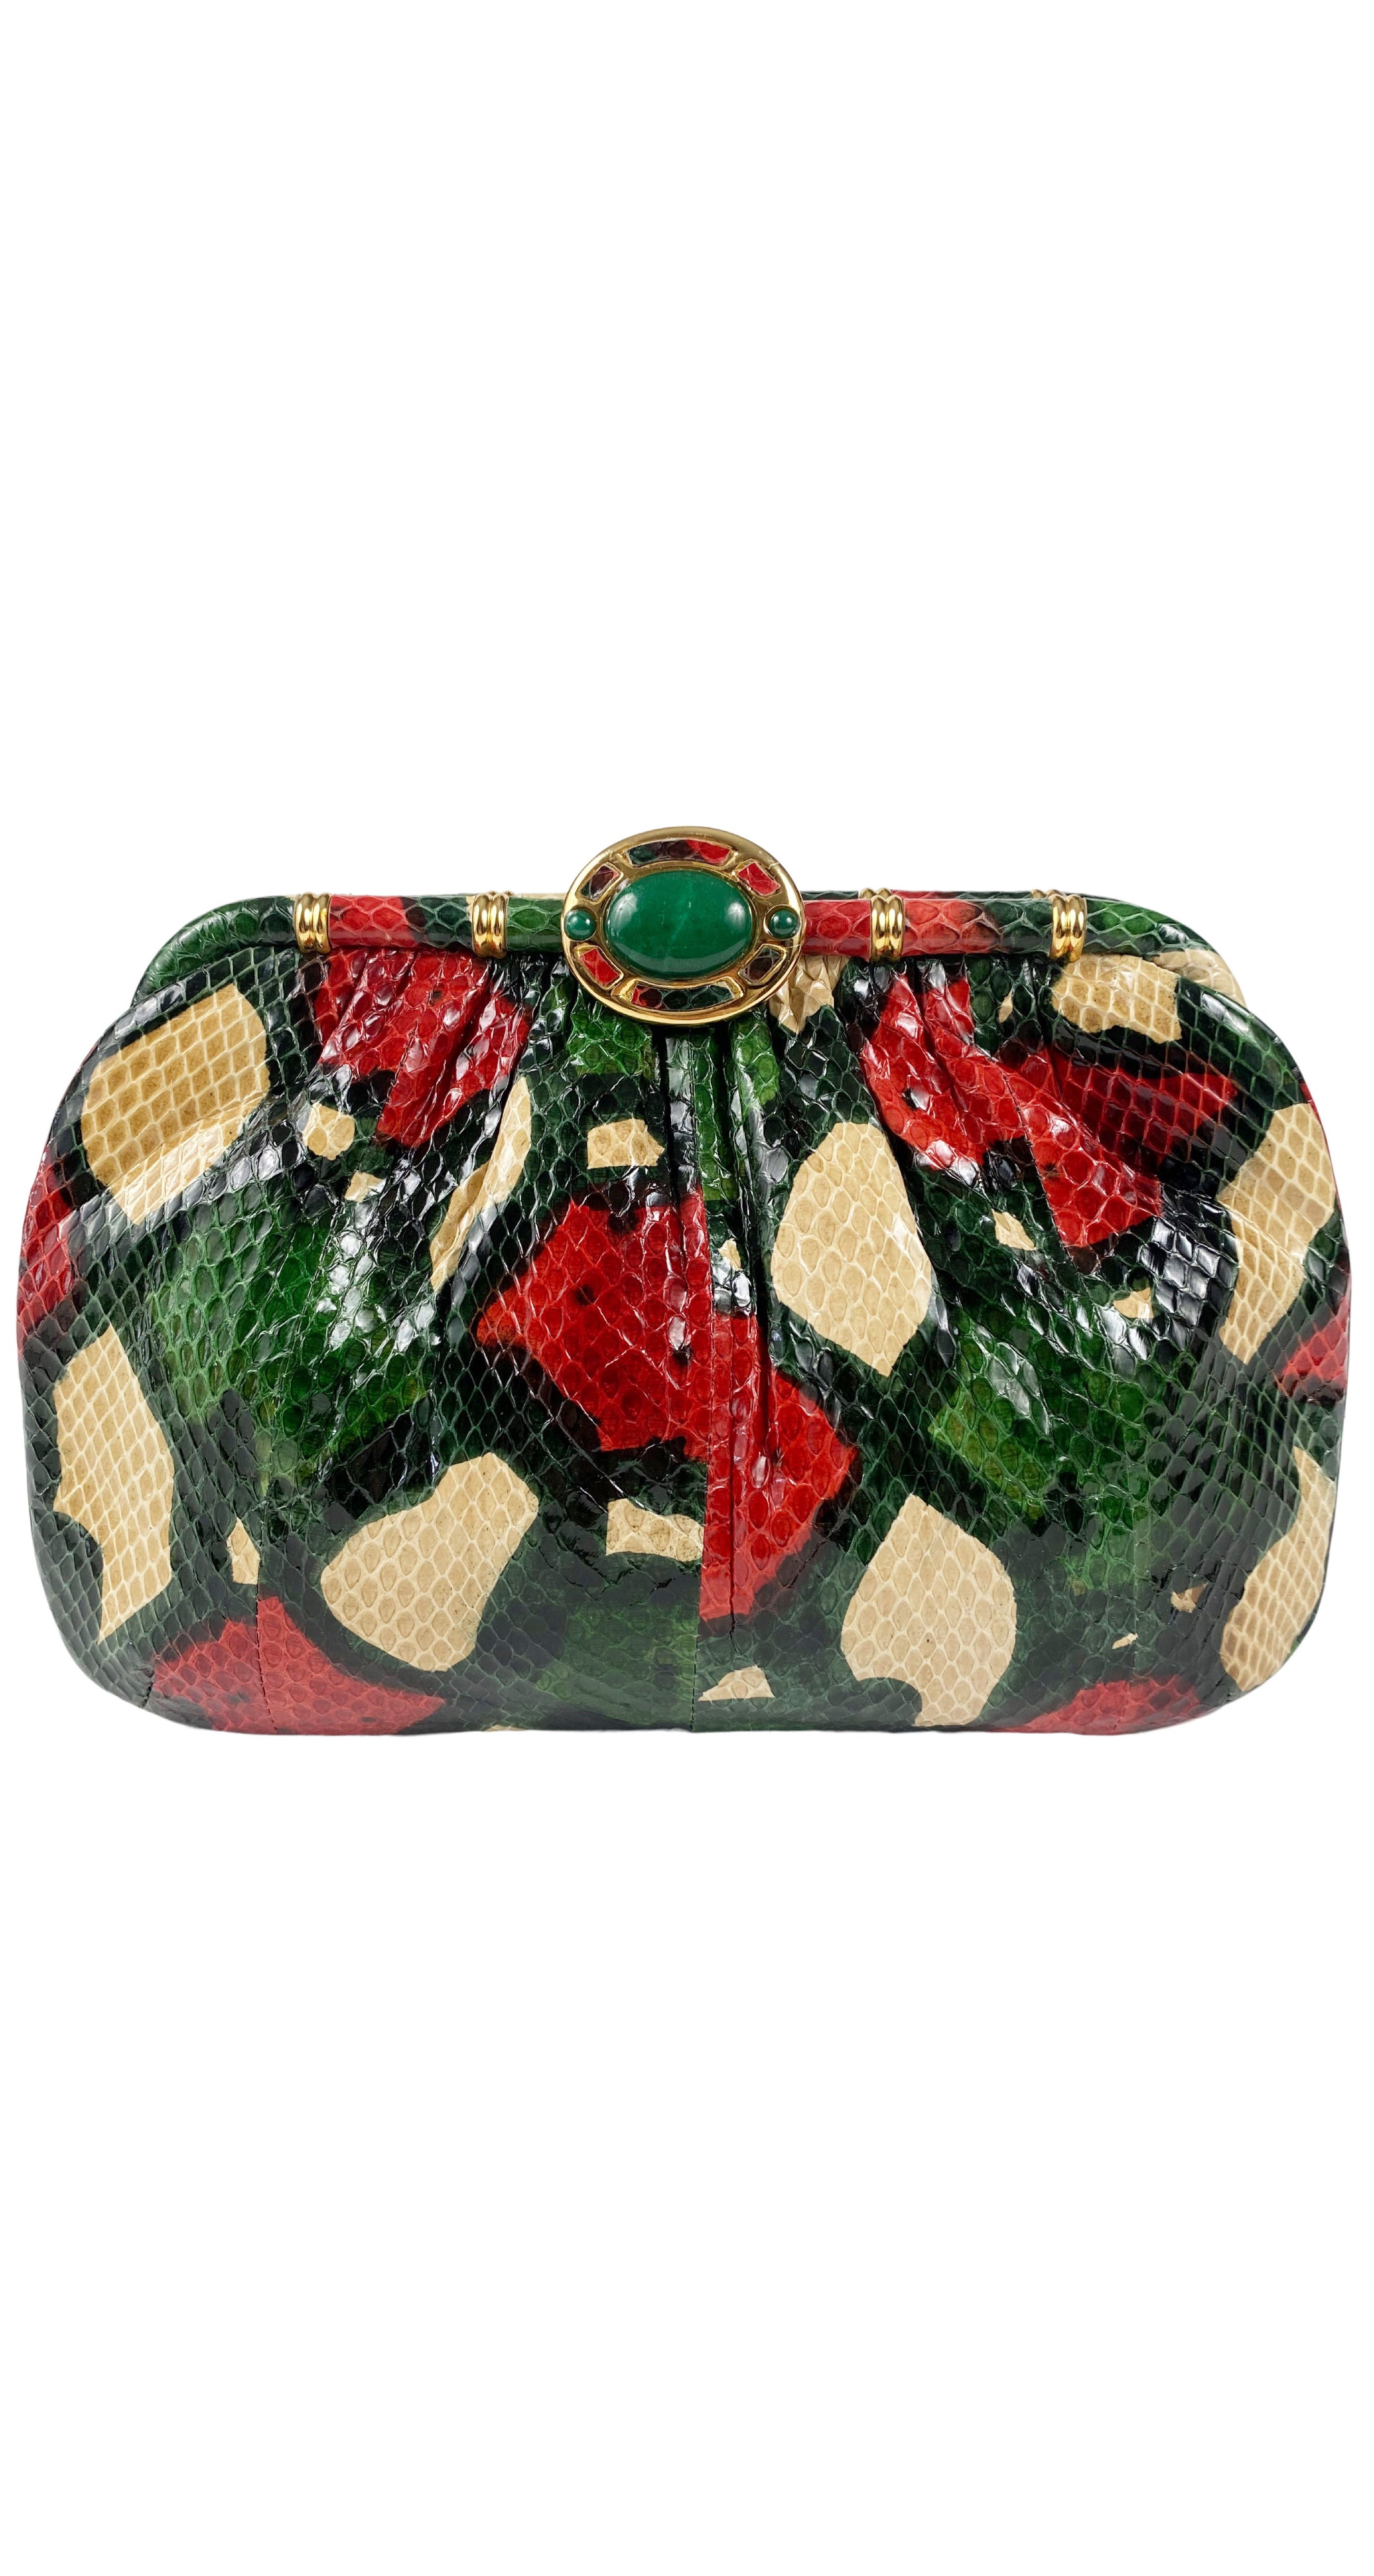 1980s Green & Red Snakeskin Convertible Clutch